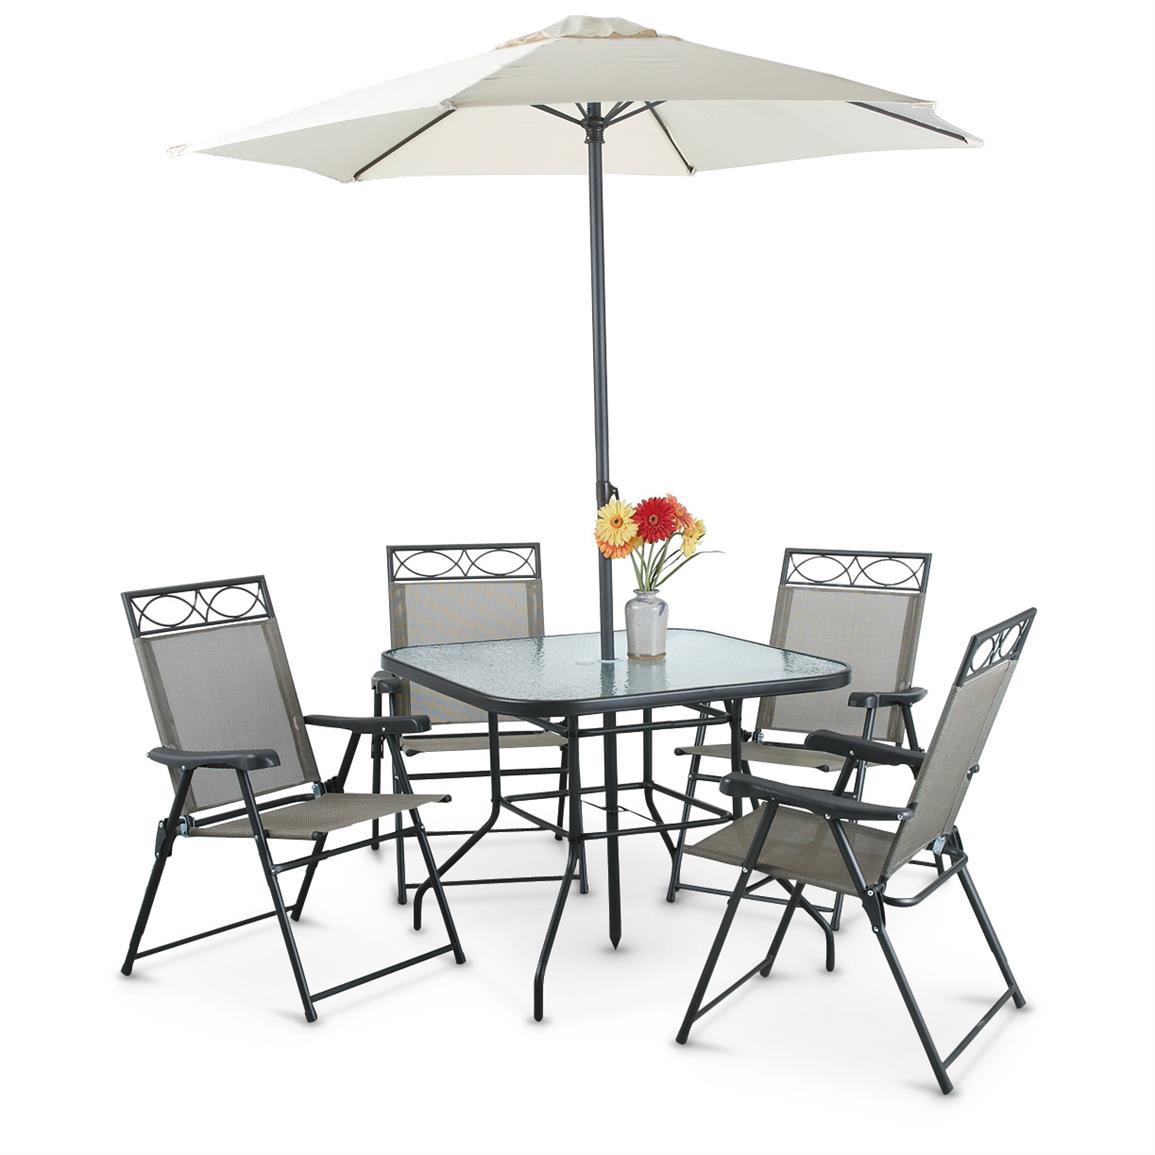 Deluxe Outdoor Patio Dining Set, 6 Piece - 617279, Patio Furniture at